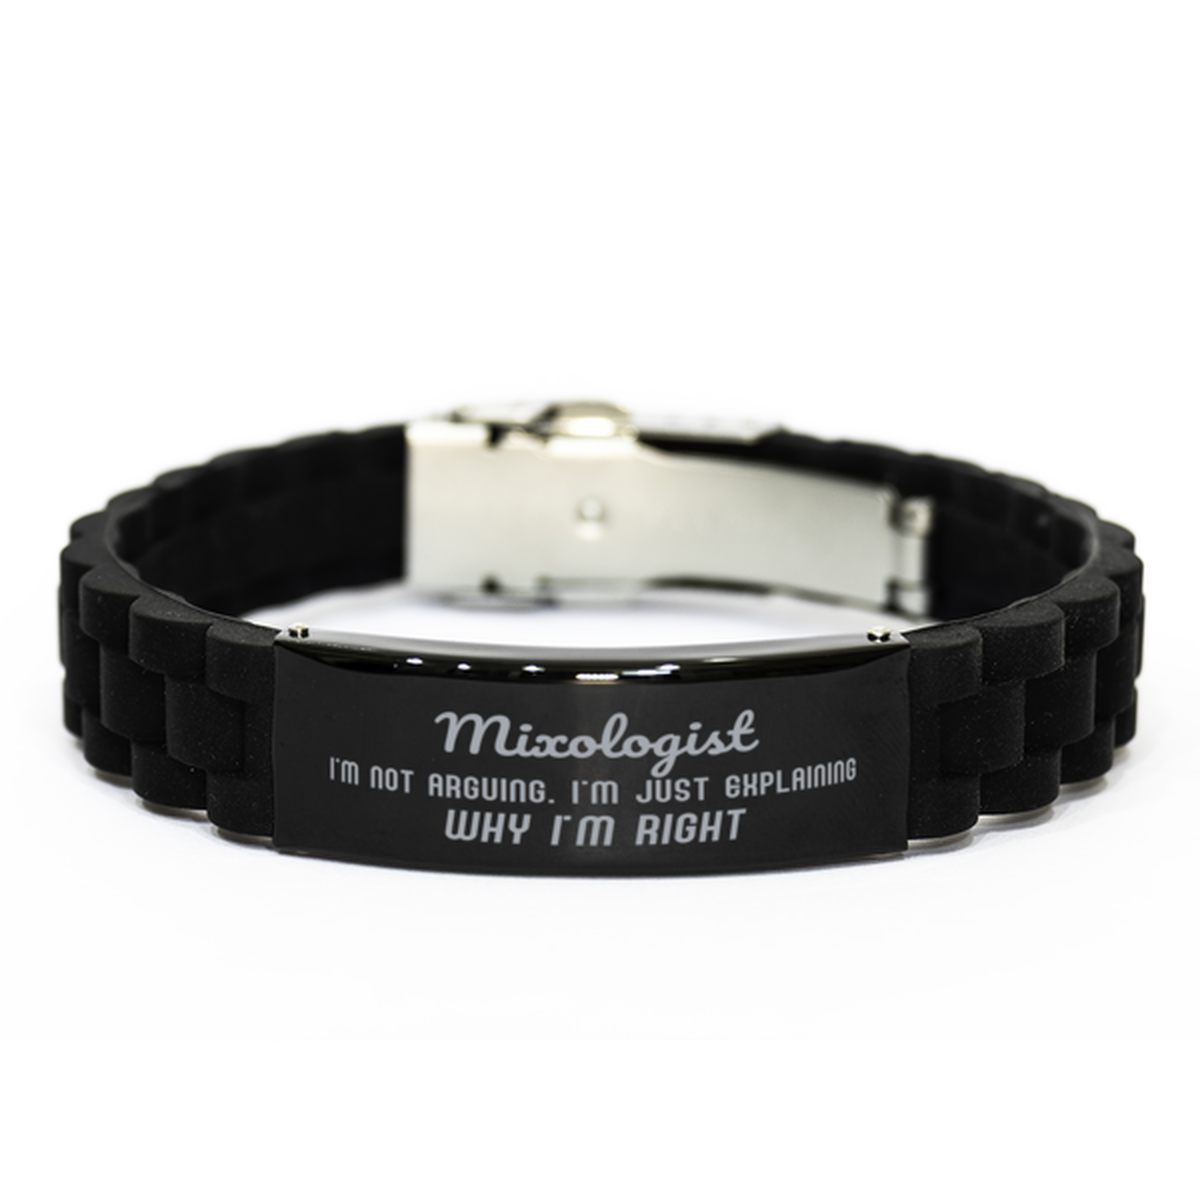 Mixologist I'm not Arguing. I'm Just Explaining Why I'm RIGHT Black Glidelock Clasp Bracelet, Funny Saying Quote Mixologist Gifts For Mixologist Graduation Birthday Christmas Gifts for Men Women Coworker